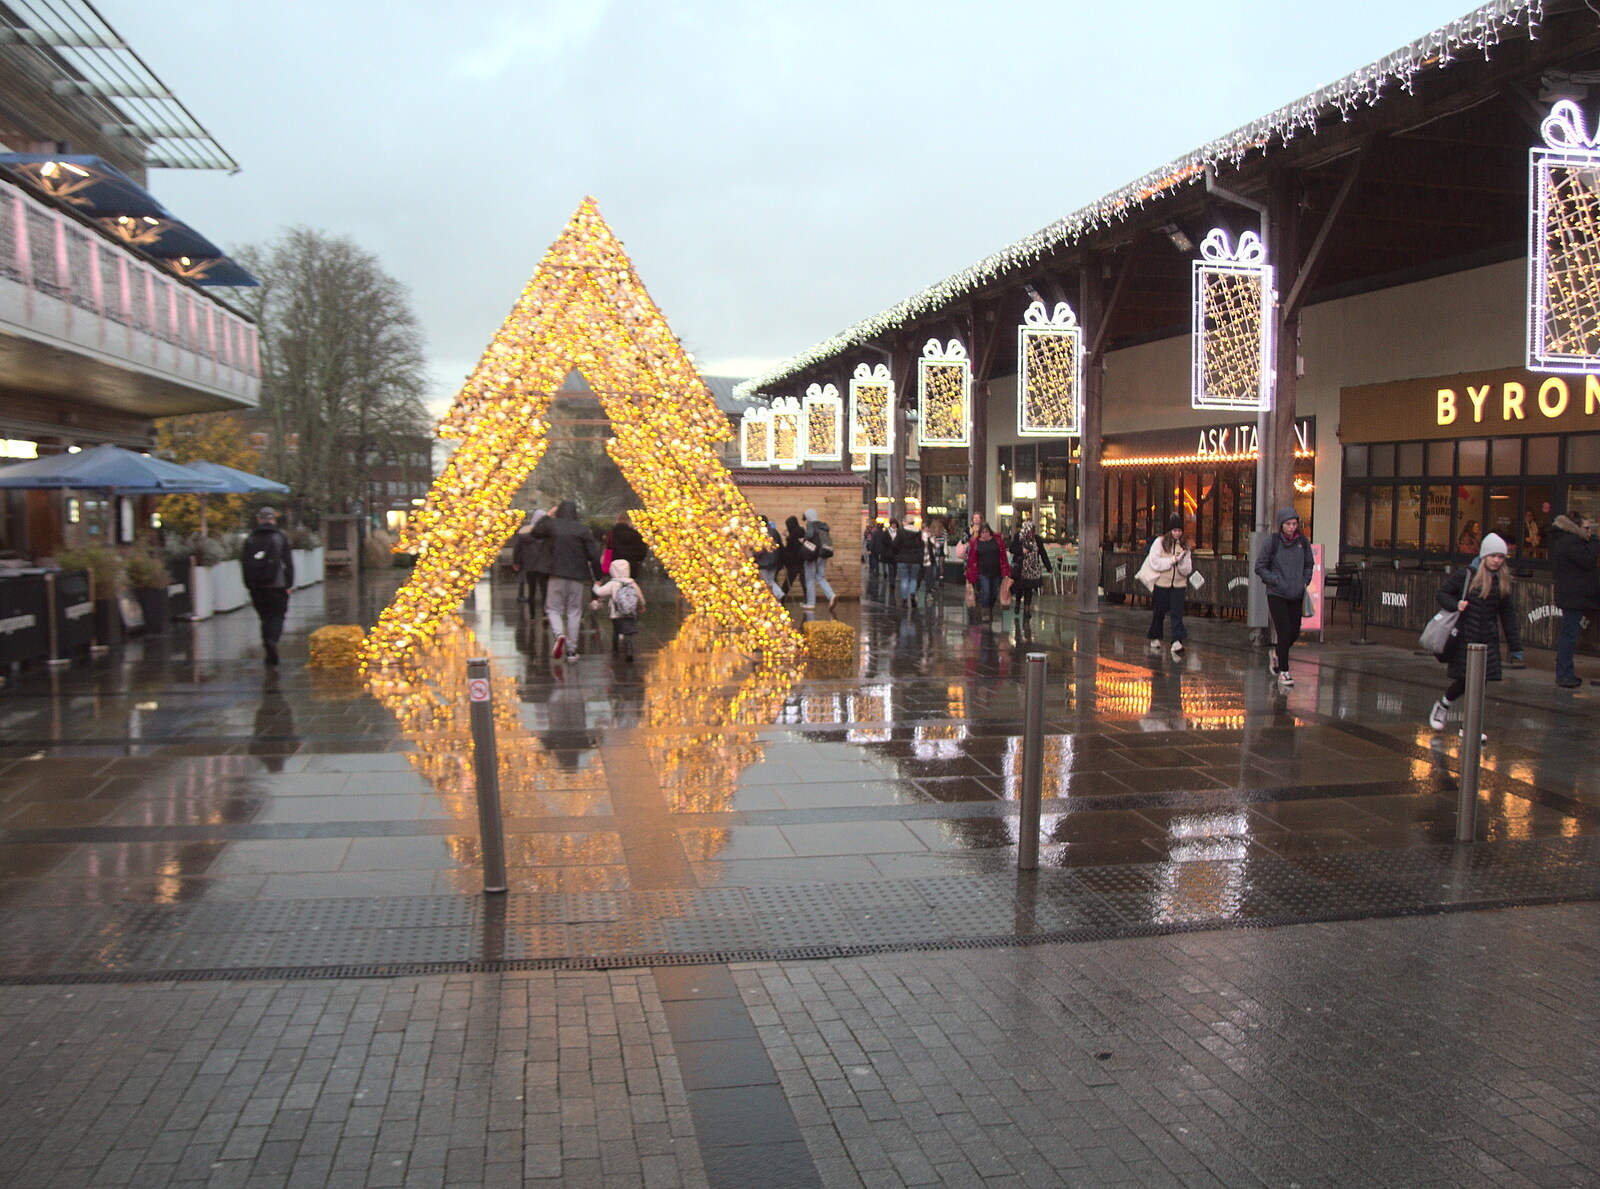 More Christmas lights on Chapelfield from Lunch in Norwich and the GSB at Gislingham, Suffolk - 26th November 2022